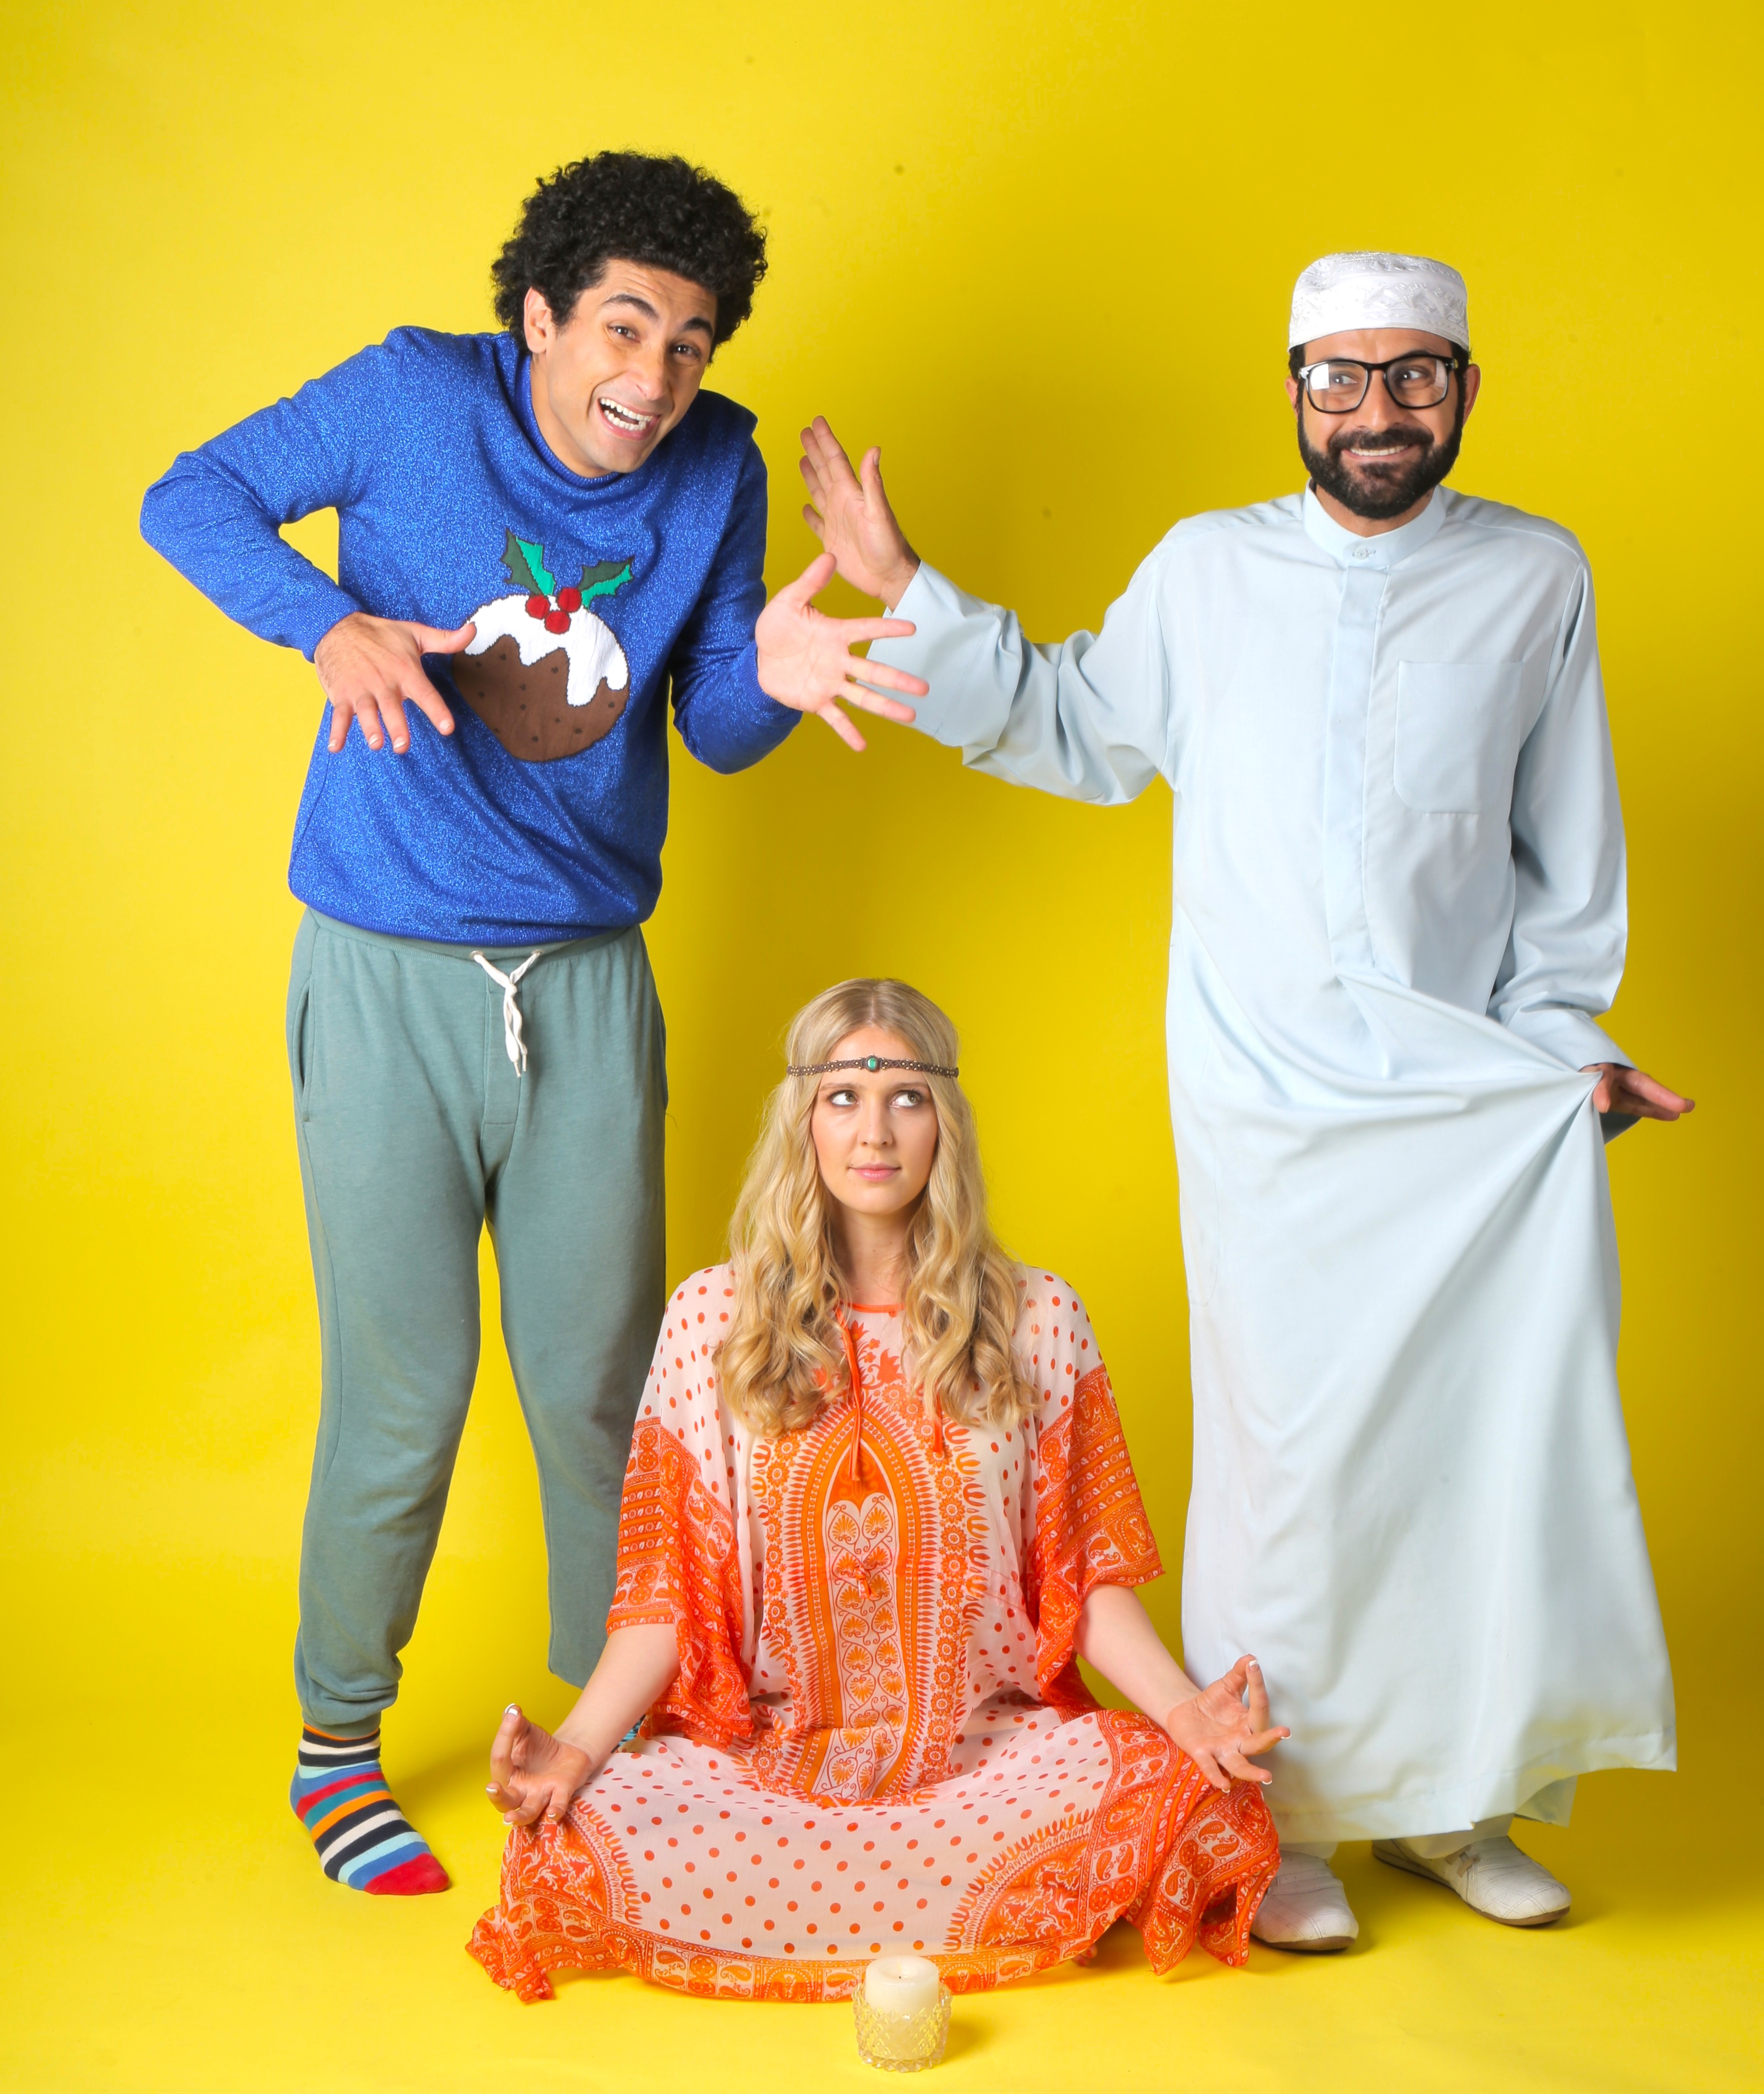 Publicity Image, Two Refugees and a Blonde